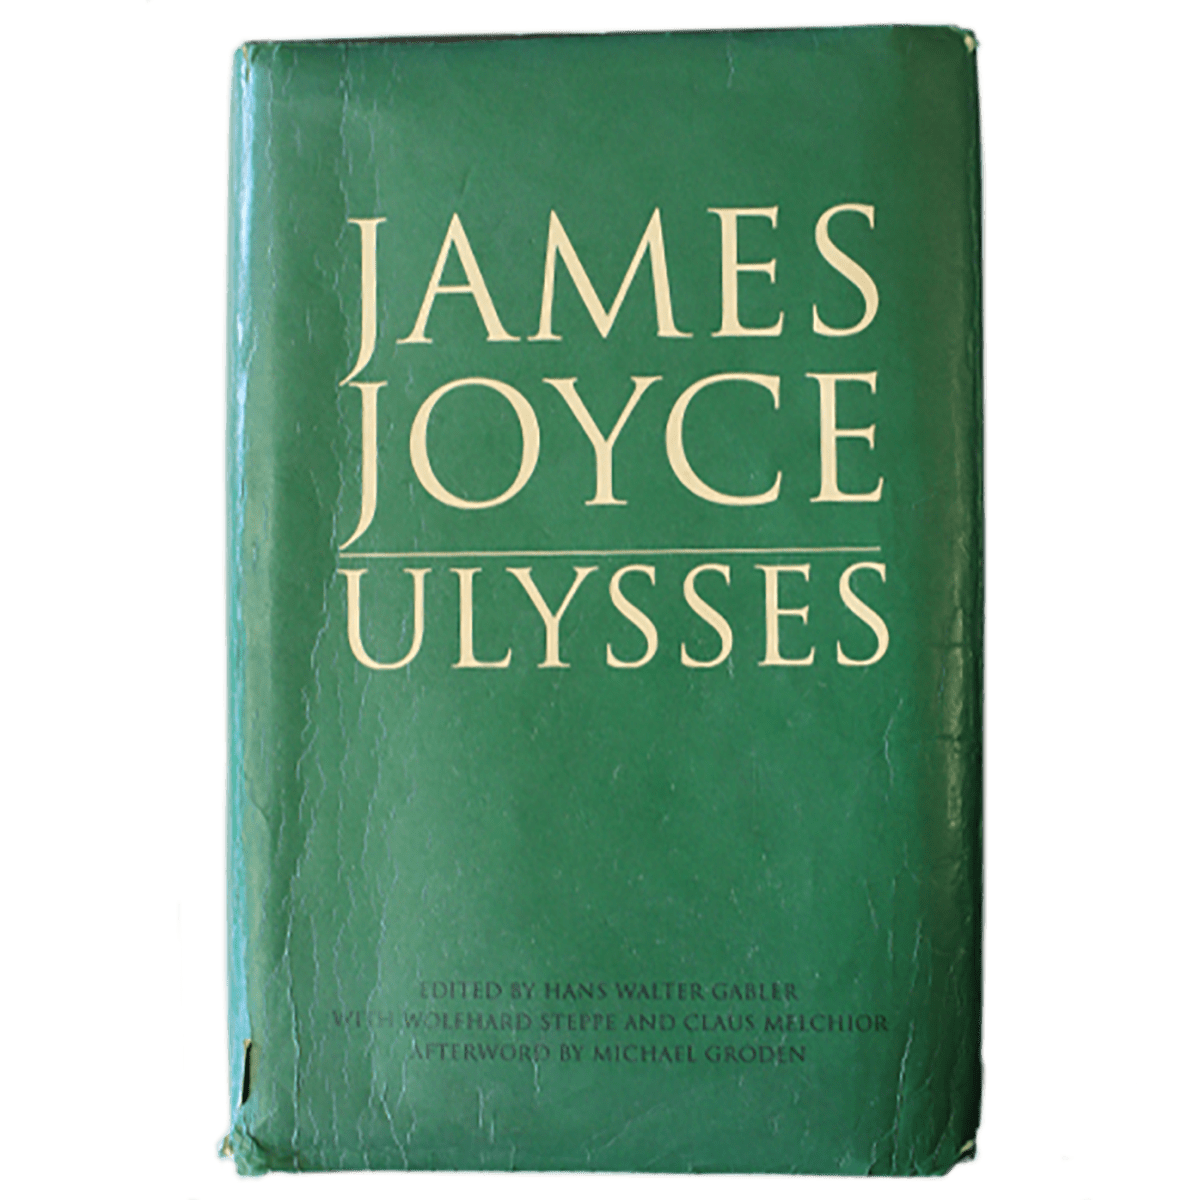 Why James Joyce’s novel “Ulysses” matters on its 100th anniversary